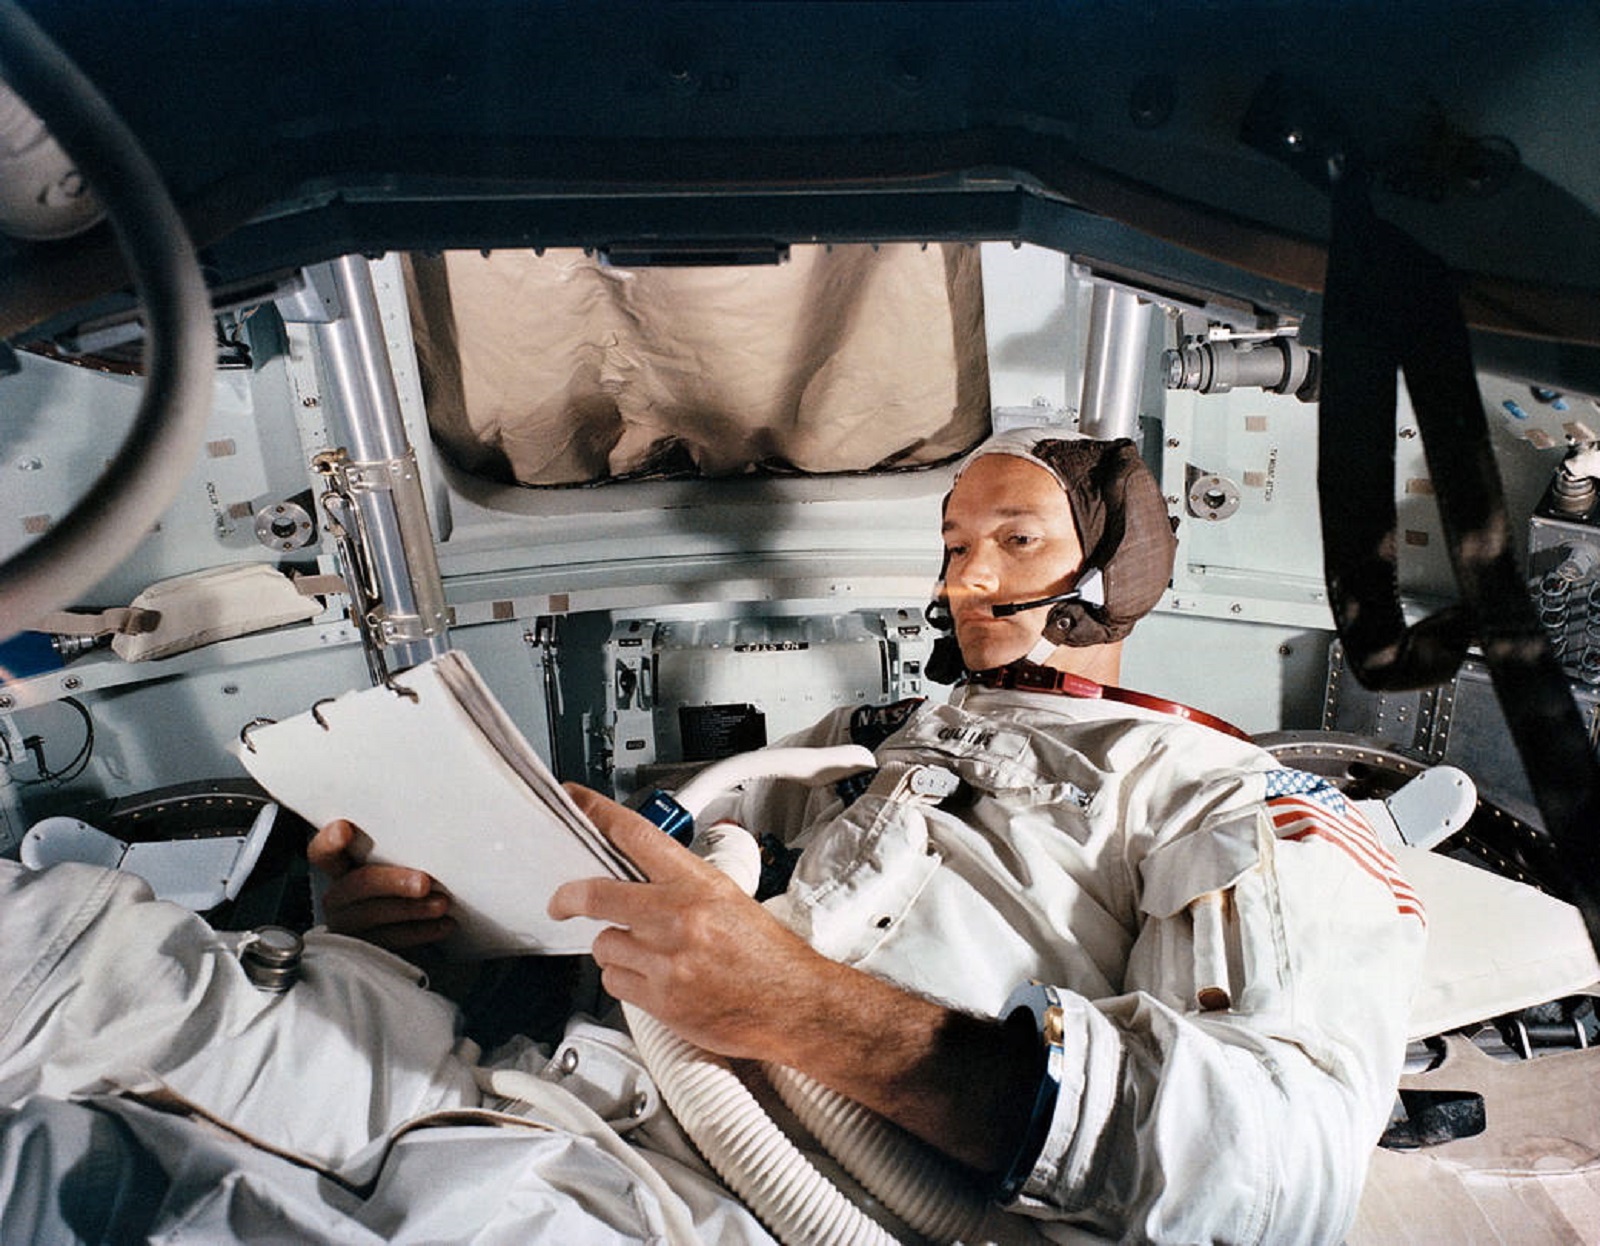 epa09165748 A handout photo made available by the NASA shows Command Module (CM) pilot Michael Collins practices in the CM simulator at Kennedy Space Center, Florida, USA, 19 June 1969 (issued 28 April 2021). The Apollo 11 crew astronaut Michael Collins has died at the age of 90, his familly announced in a statement on 28 April 2021.  EPA/NASA HANDOUT  HANDOUT EDITORIAL USE ONLY/NO SALES